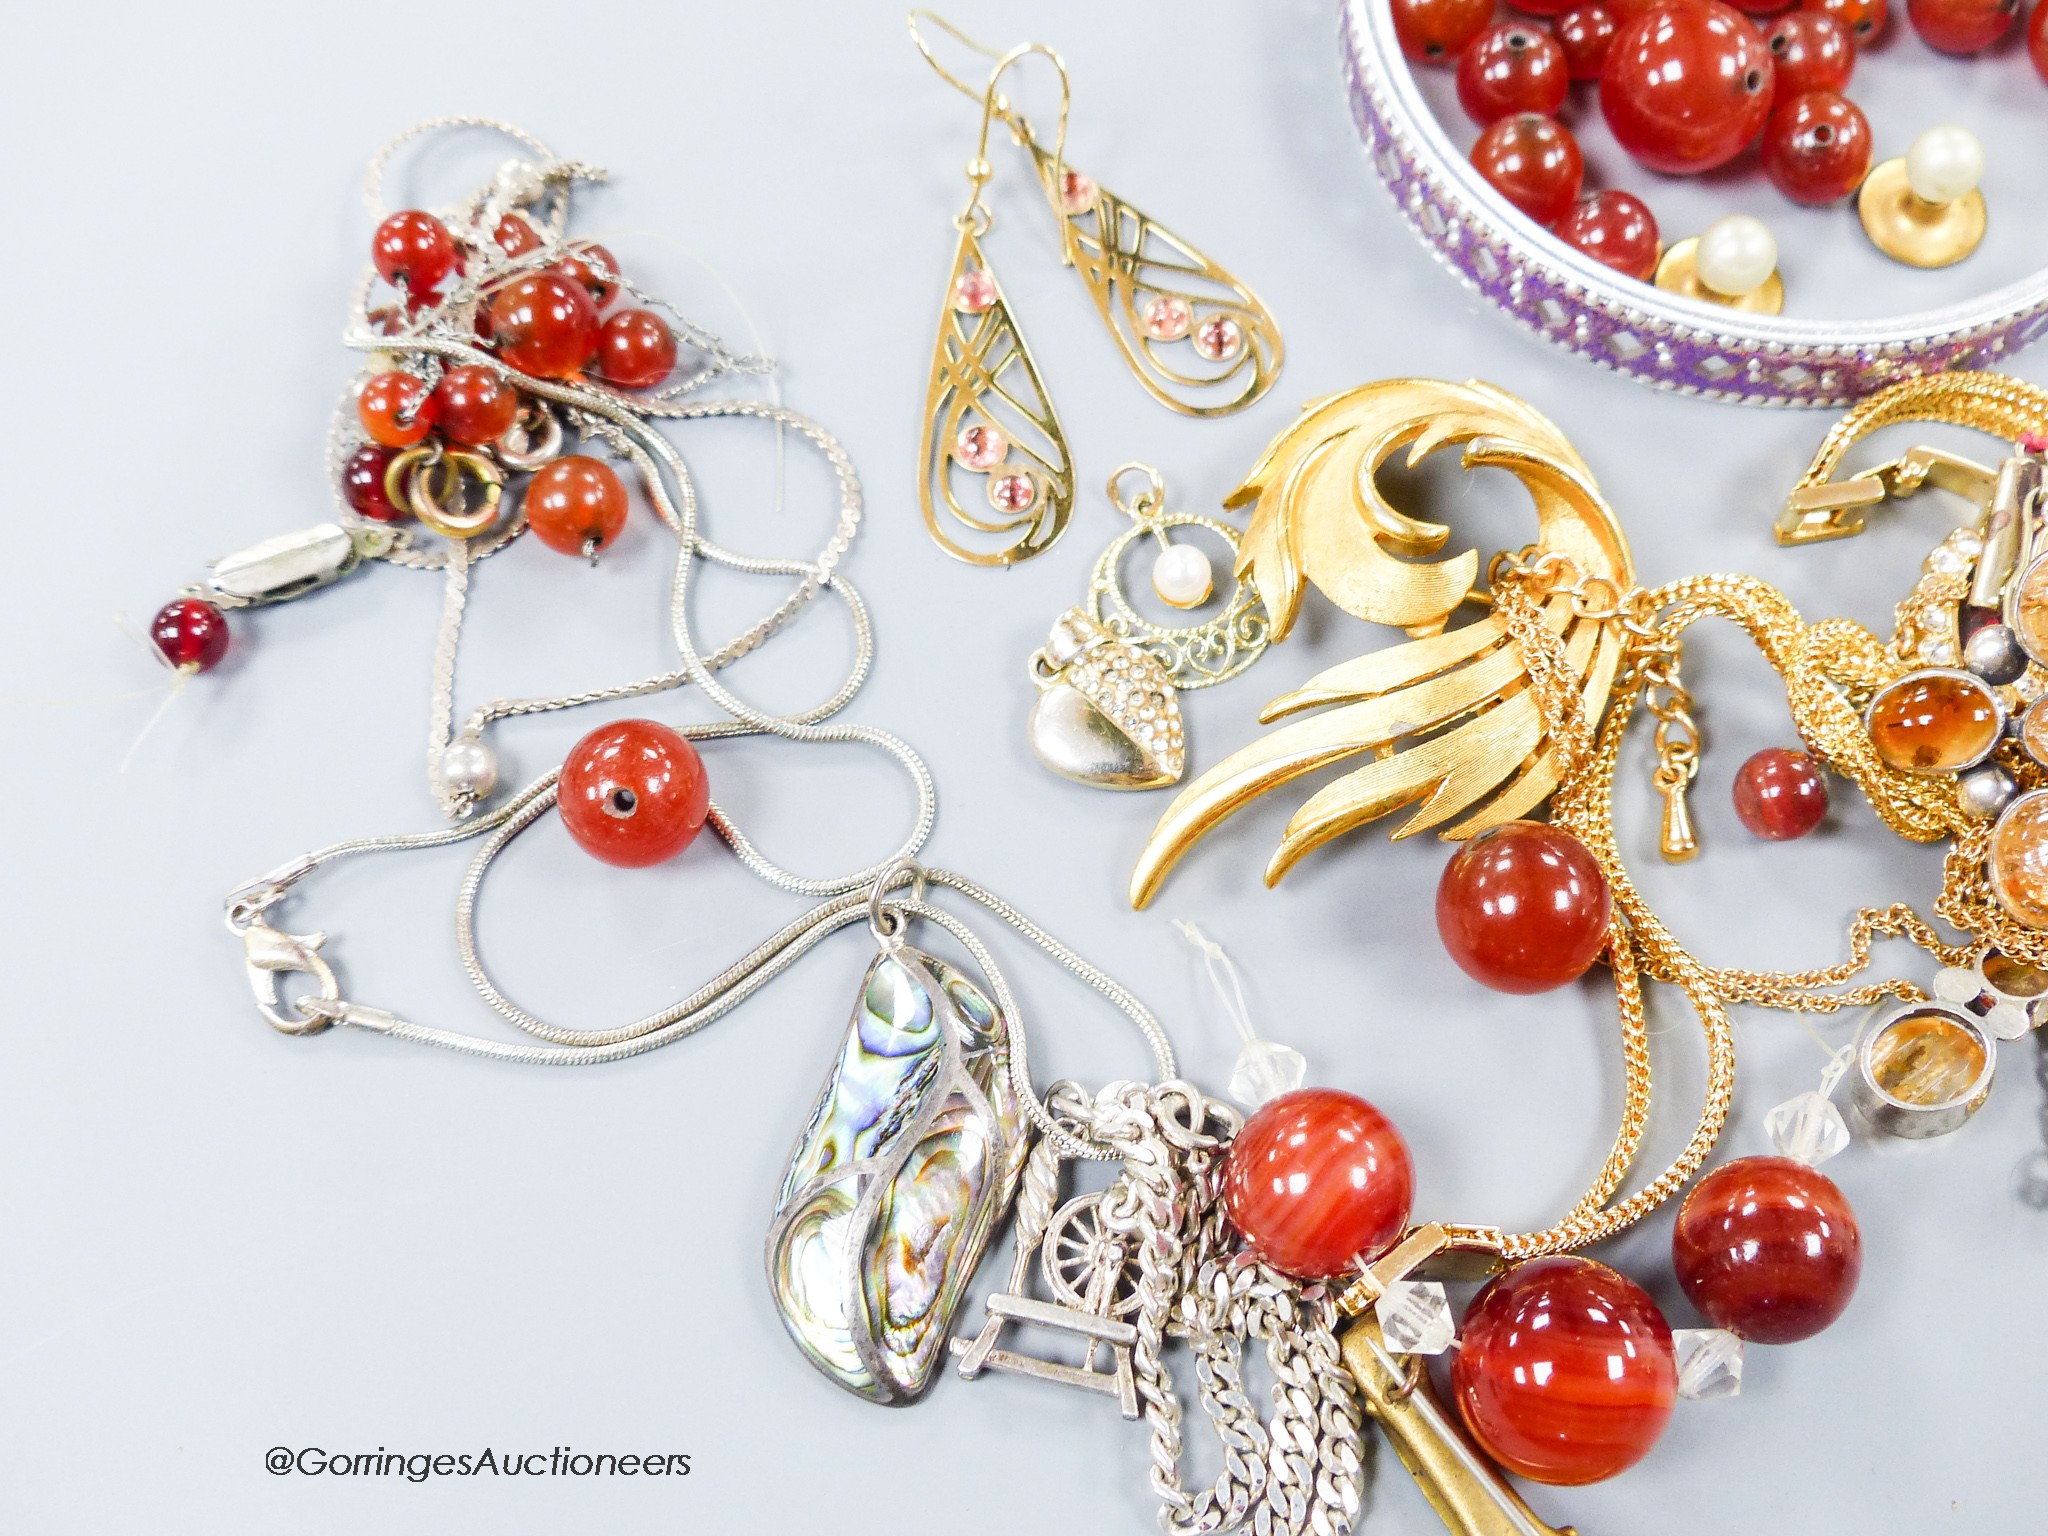 A group of mixed jewellery including yellow metal pendant, a micro mosaic banjo brooch, etc.